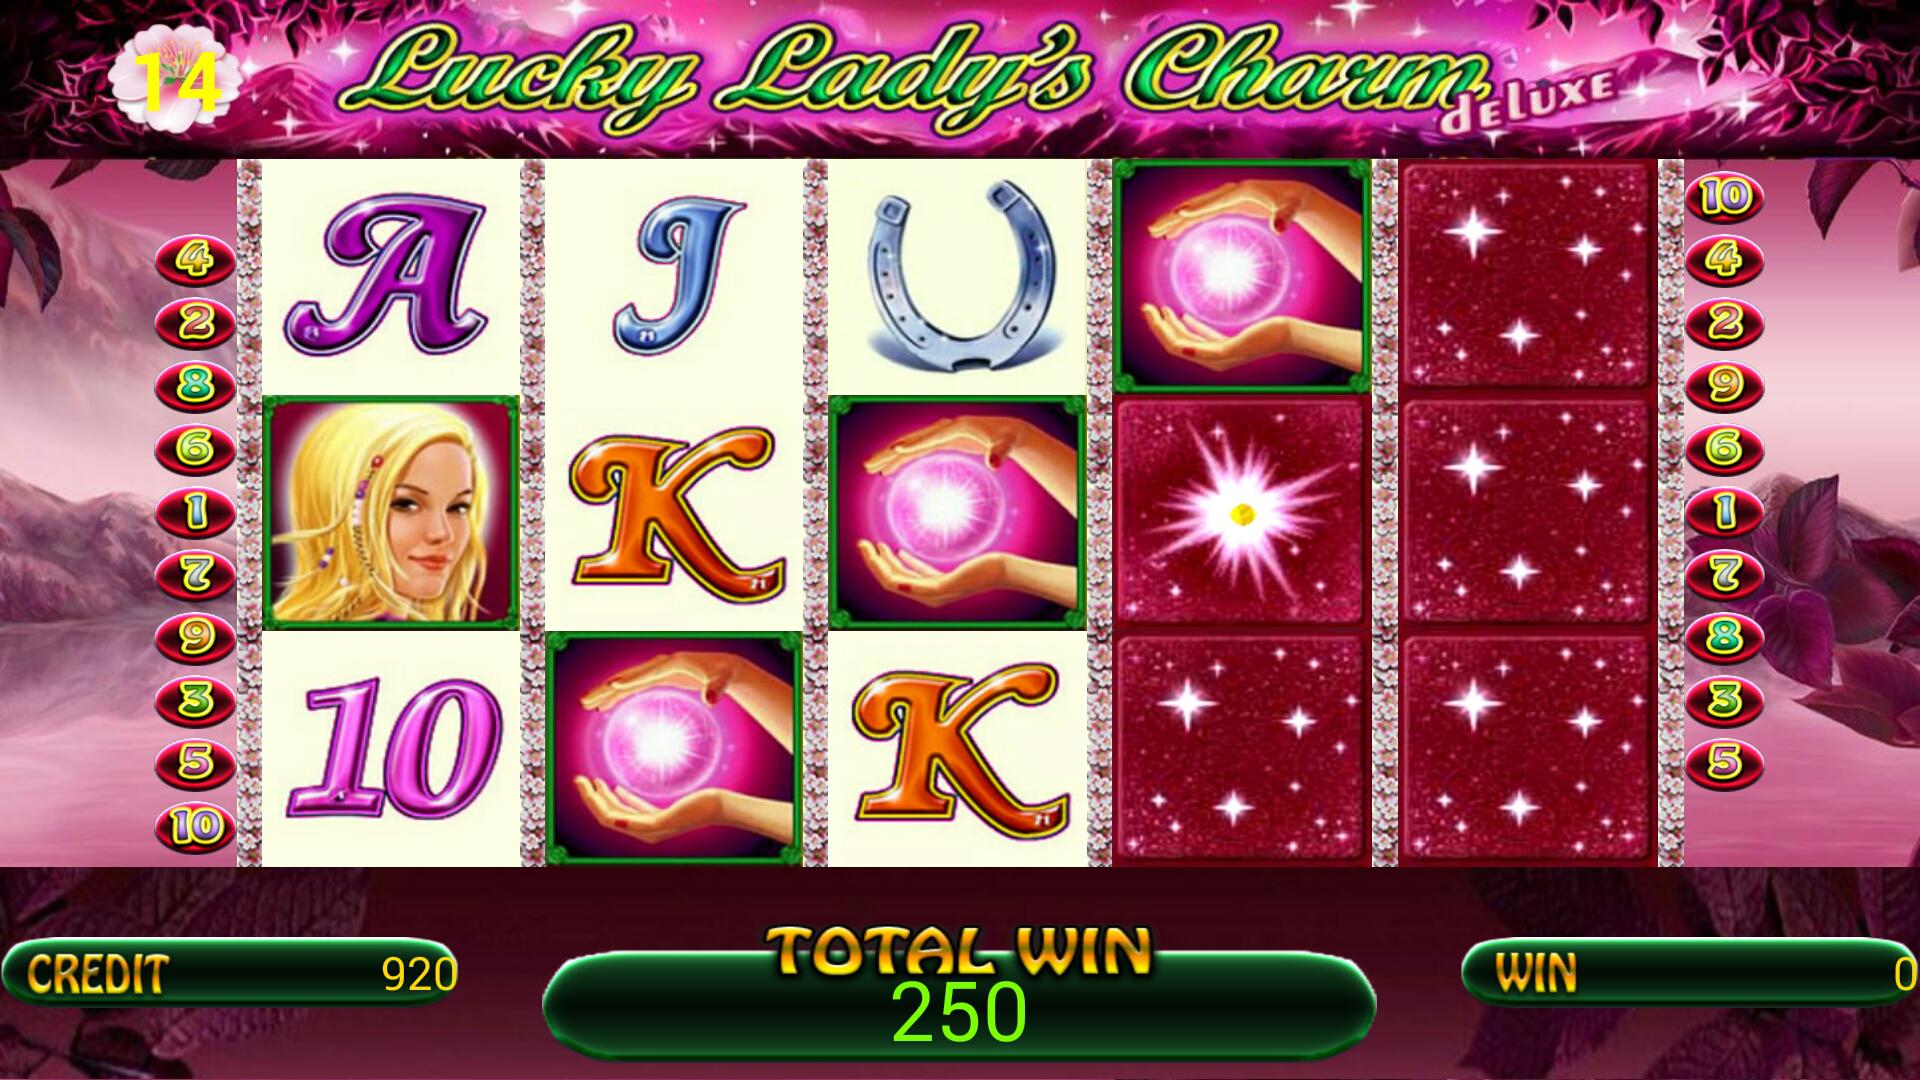 Lucky lady charm deluxe free play